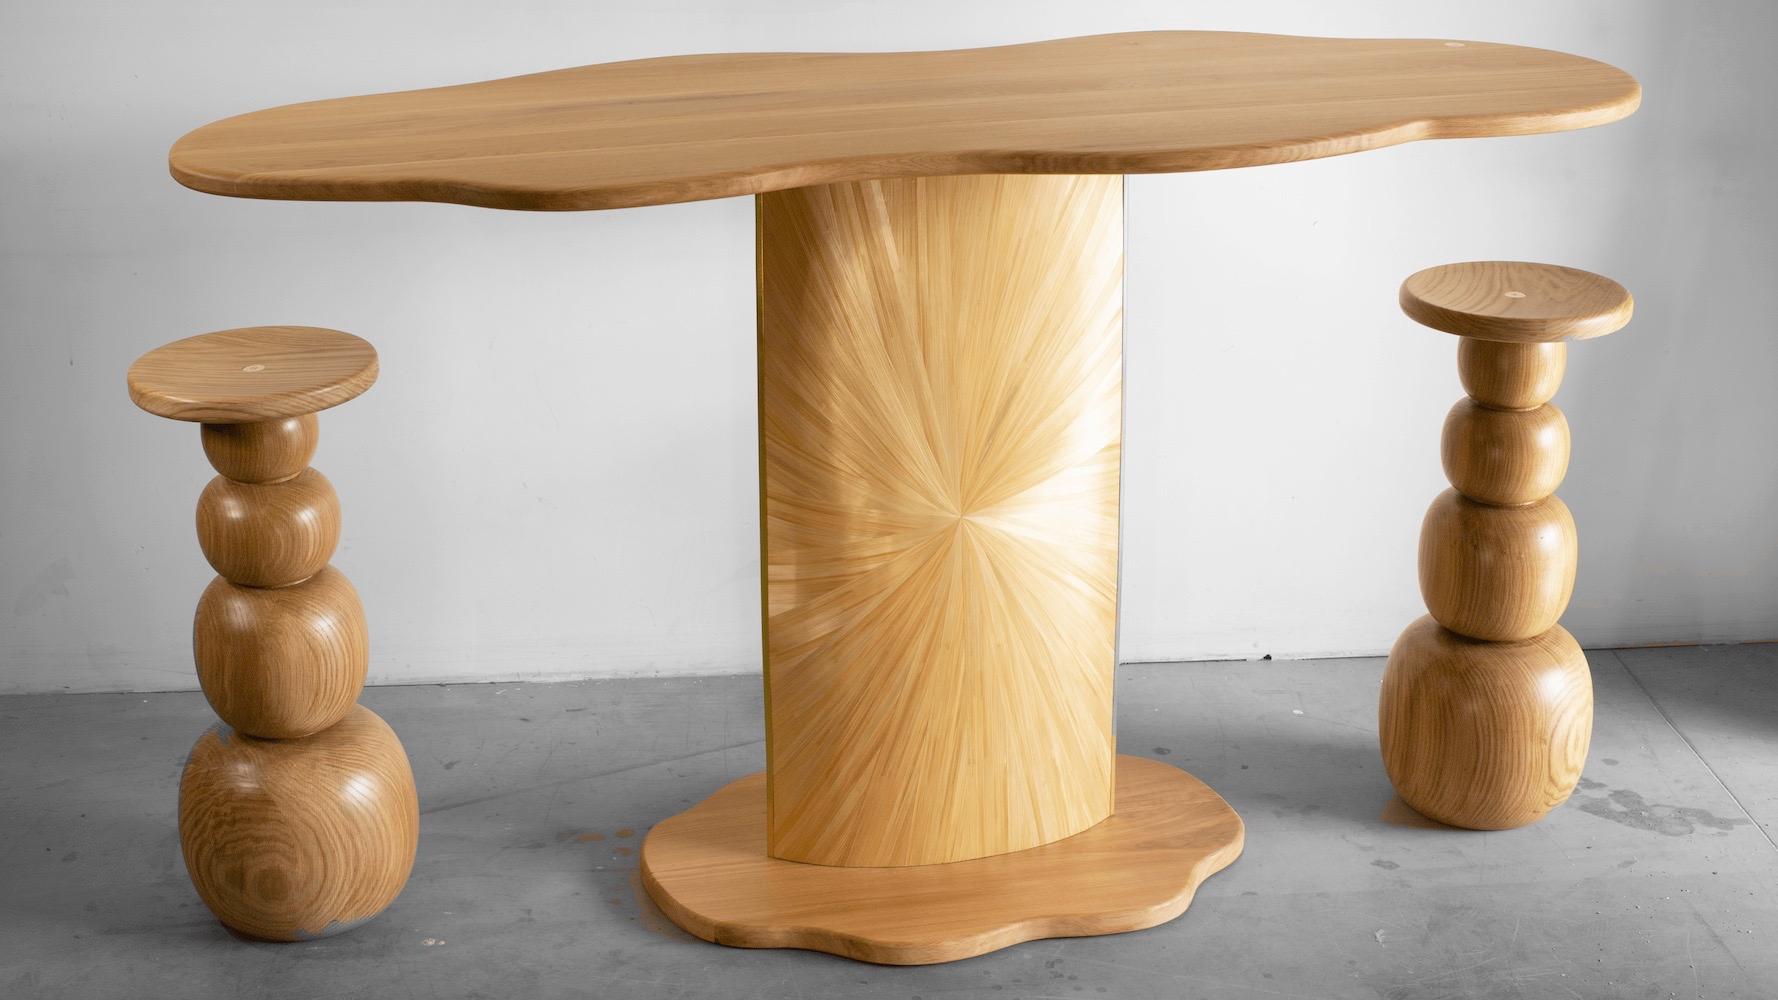 Hand-Crafted Oblivion by Seve Quantum Design 'France', Straw Marquetry Table For Sale